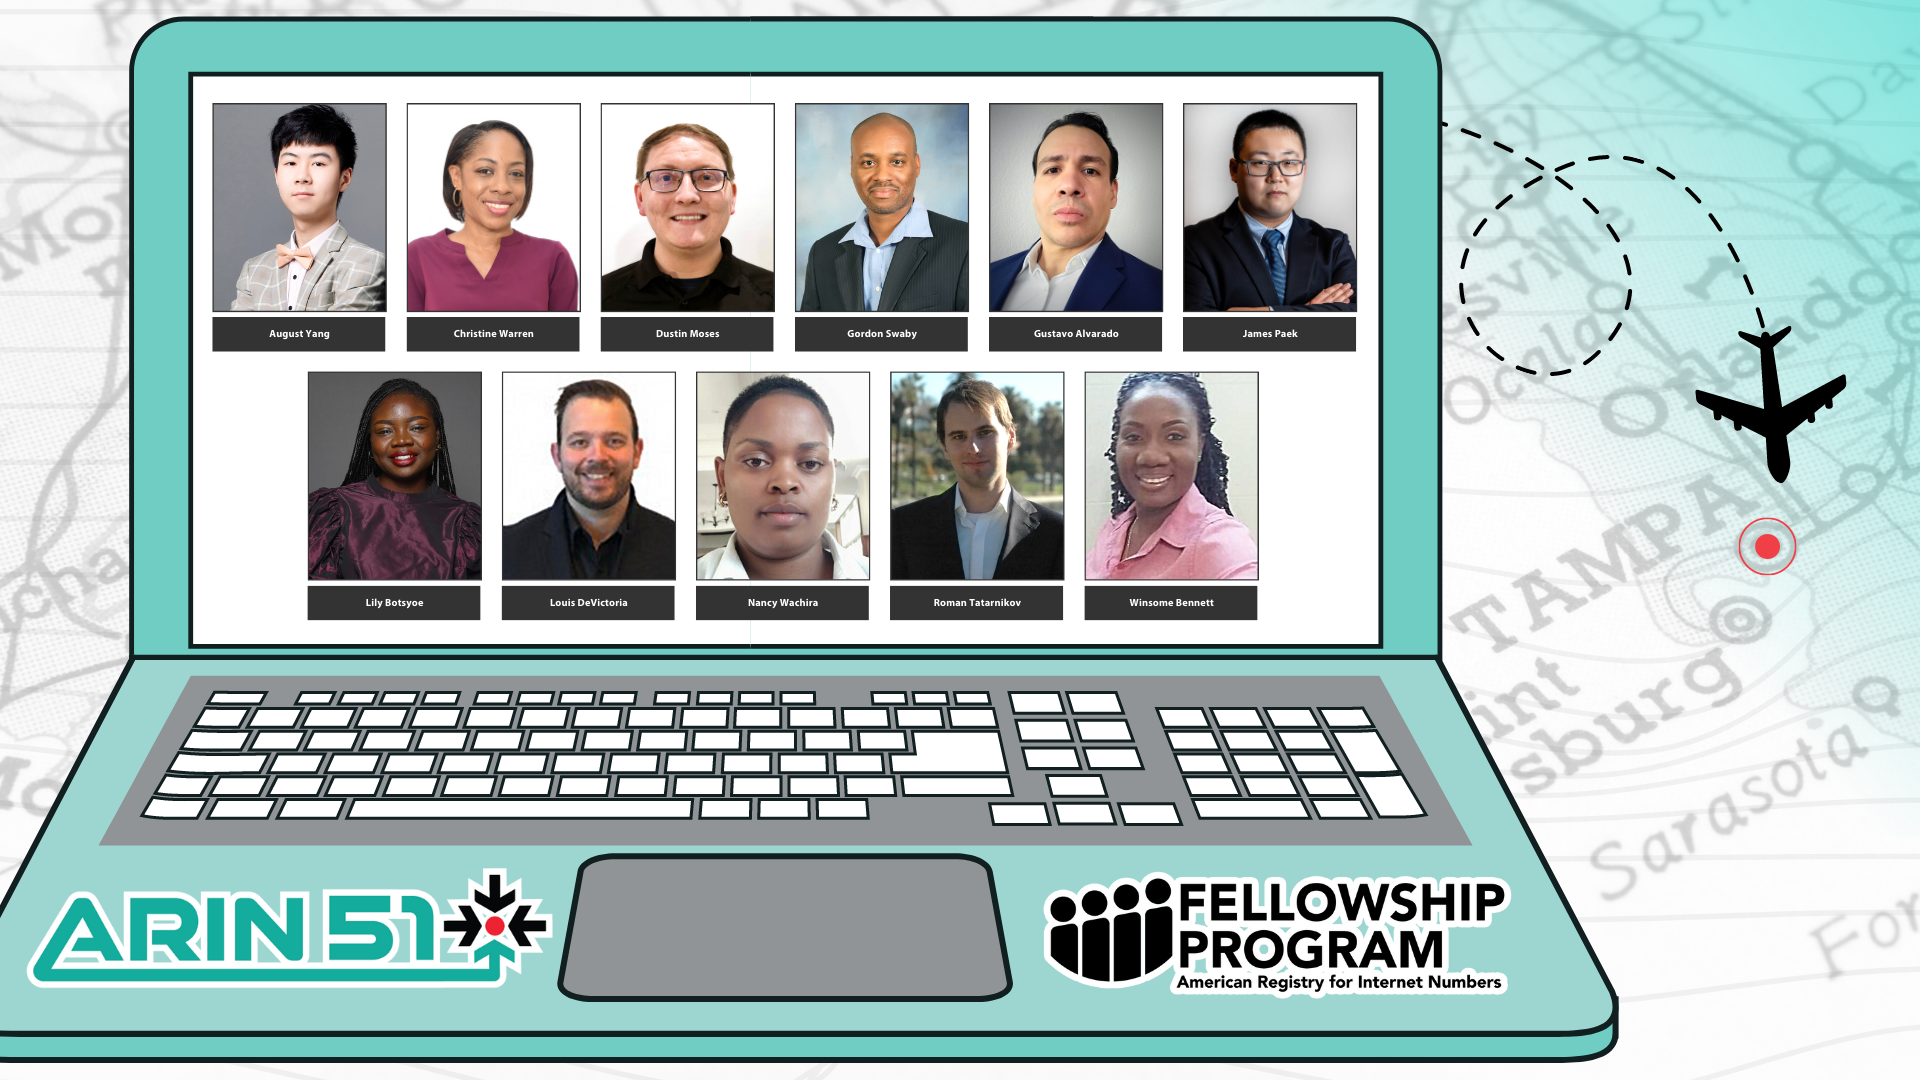 Read the blog Introducing the ARIN 51 Fellows